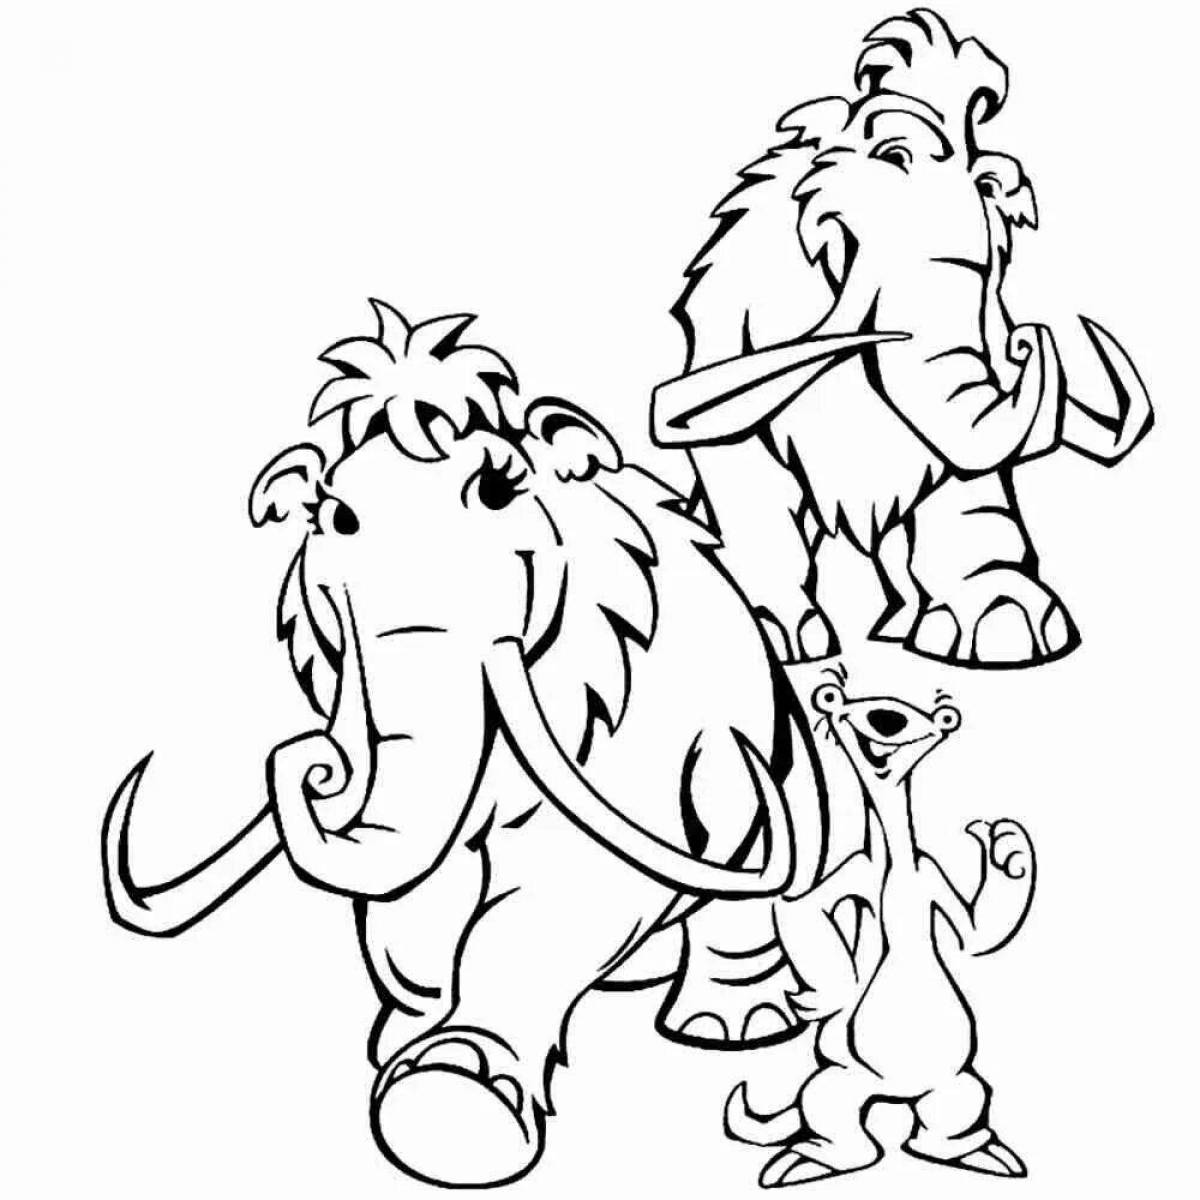 Intricate sabertooth coloring page